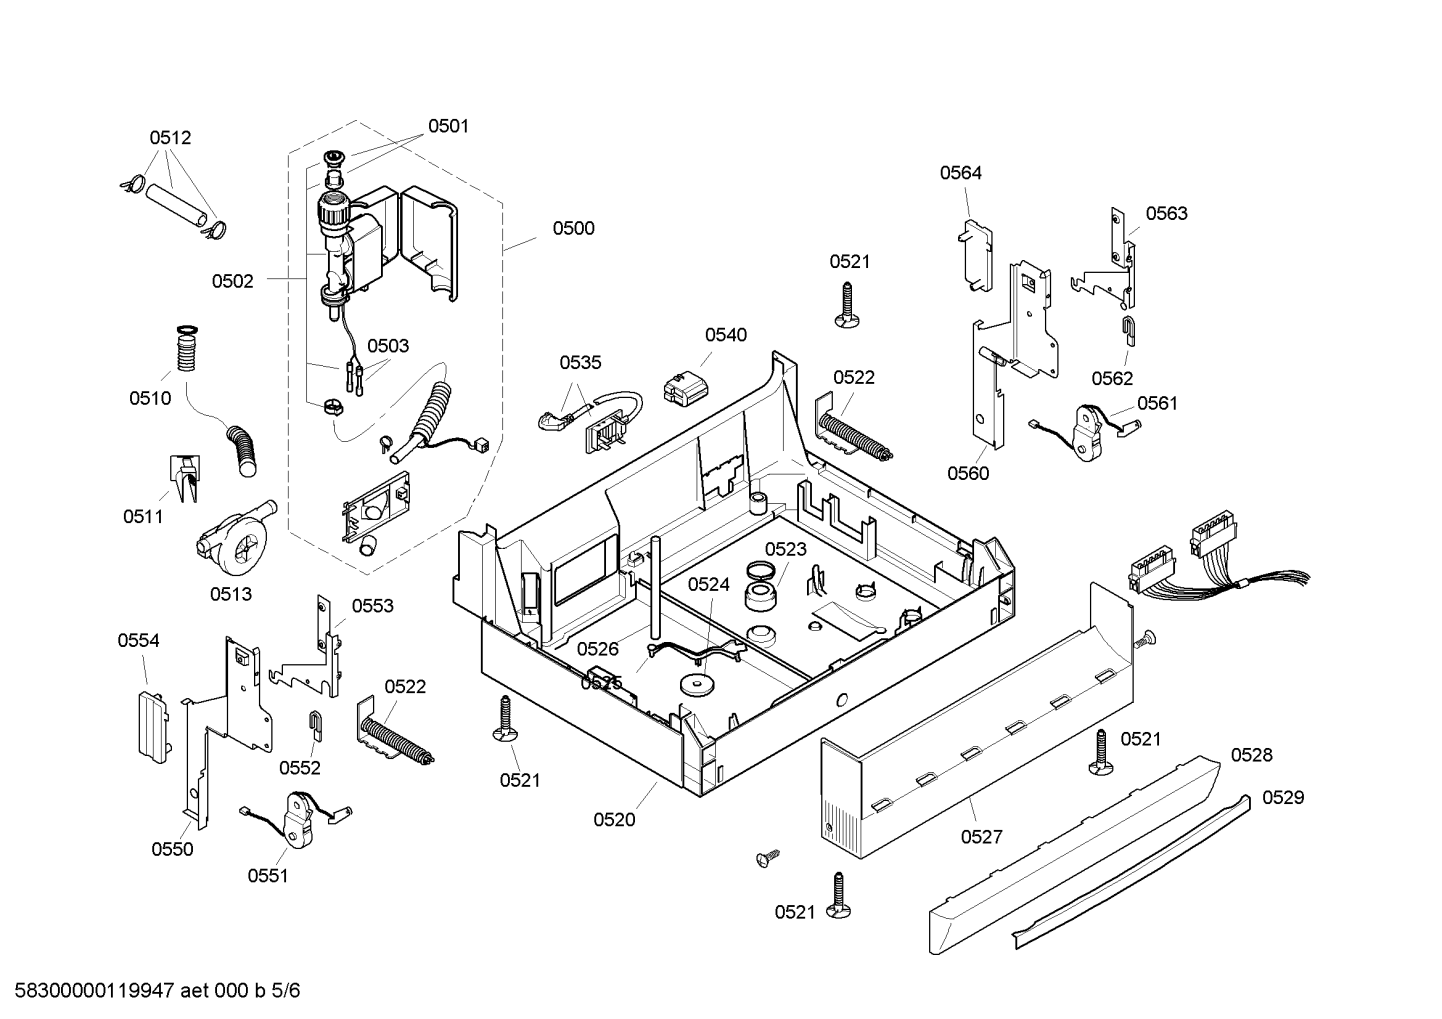 drawing_link_5_device_1267002